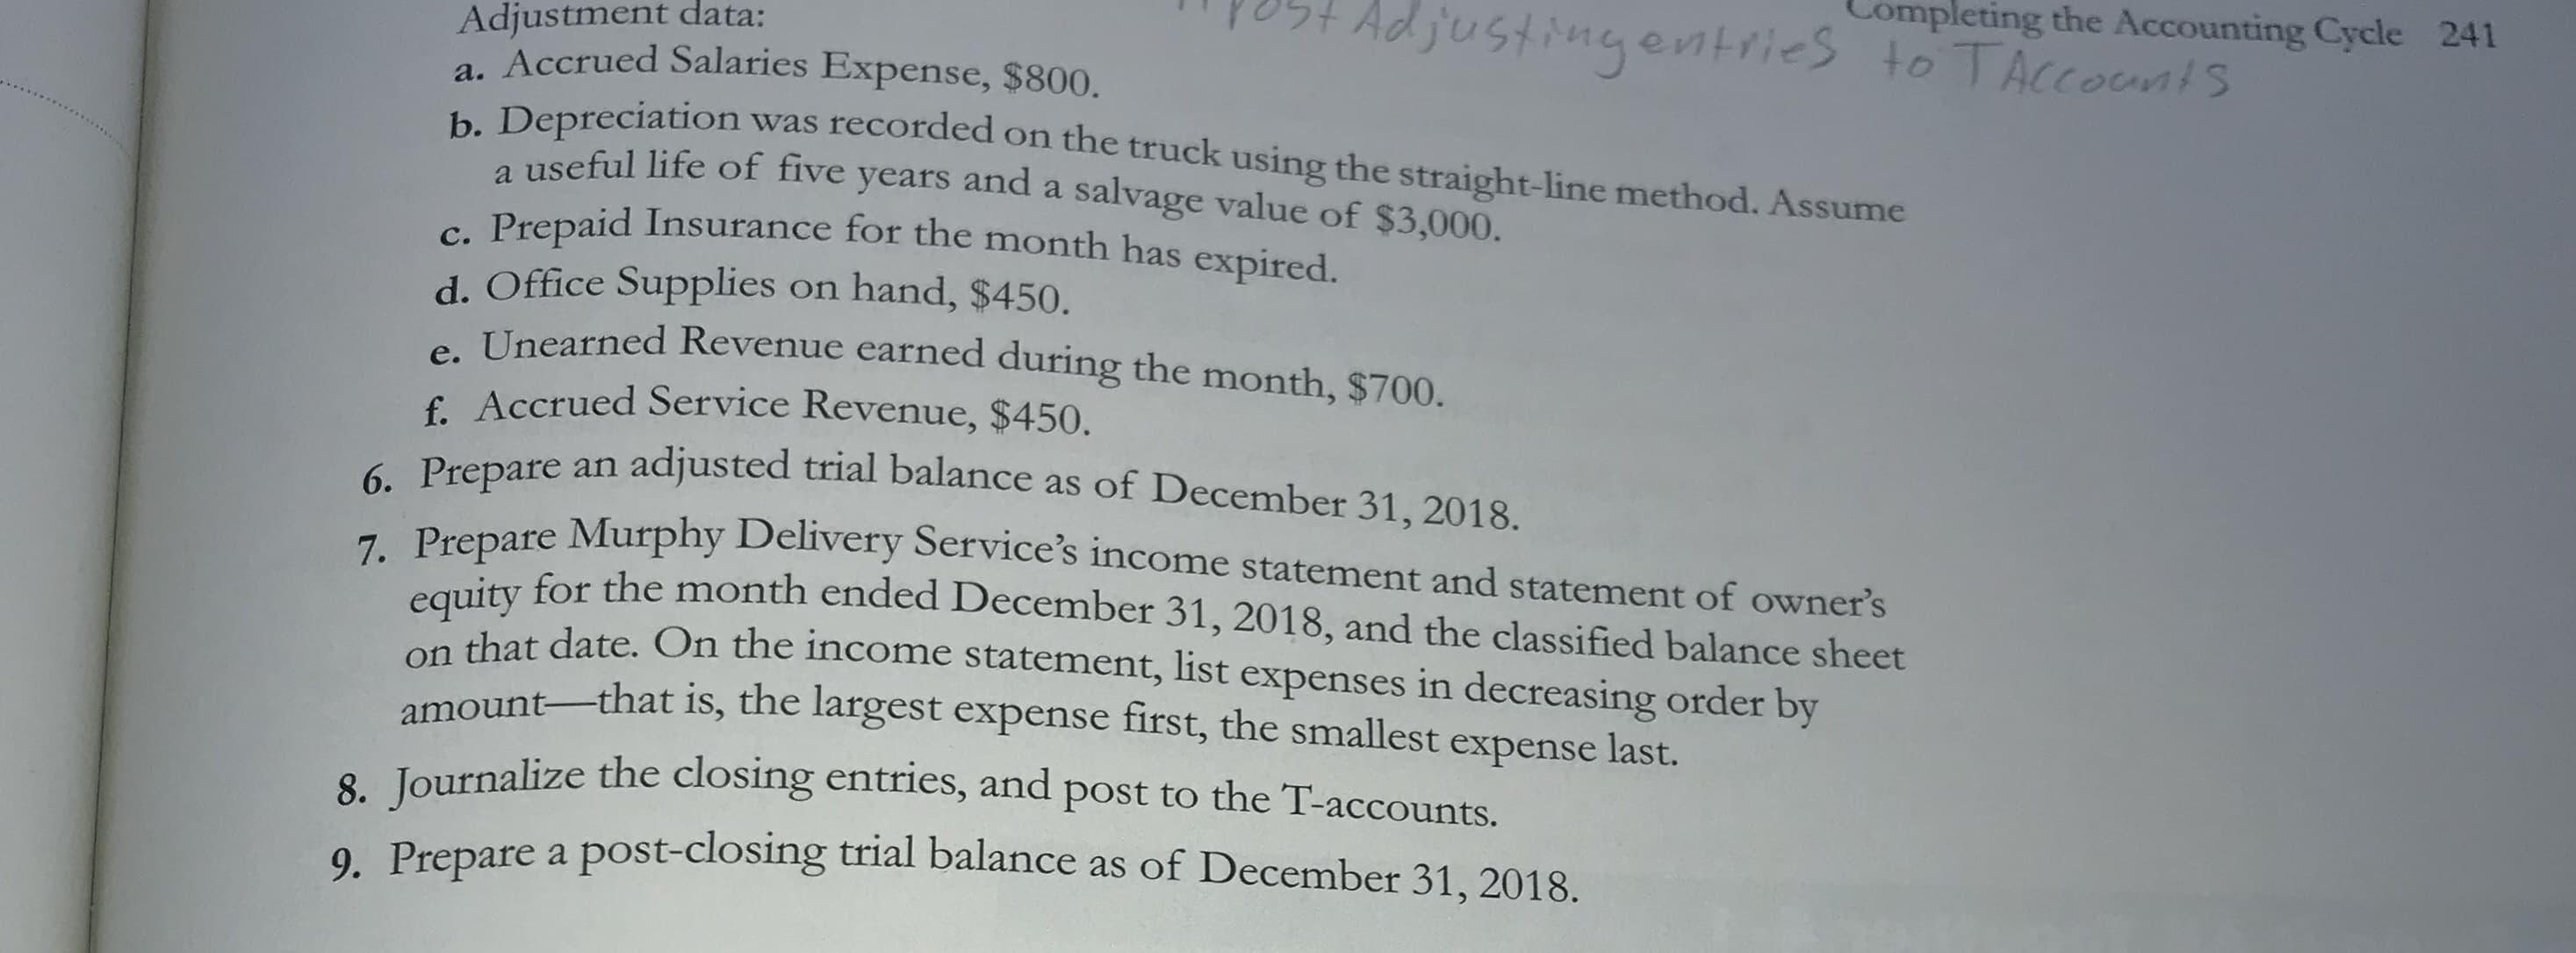 pletir
justingentries to T
Adjustment data:
a. Accrued Salaries Expense, $800.
, Depreciation was recorded on the truck using the straight-line method. Assume
a useful life of five years and a salvage value of $3,000.
Prepaid Insurance for the month has expired.
d. Office Supplies on hand, $450.
e Unearned Revenue earned during the month, $700.
€. Accrued Service Revenue, $450.
- Prepare an adjusted trial balance as of December 31, 2018.
Prepare Murphy Delivery Service's income statement and statement of owner's
uity for the month ended December 31, 2018, and the classified balance sheet
on that date. On the income statement, list expenses in decreasing order by
amount-that is, the largest expense first, the smallest e
expense last.
pelize the closing ent
